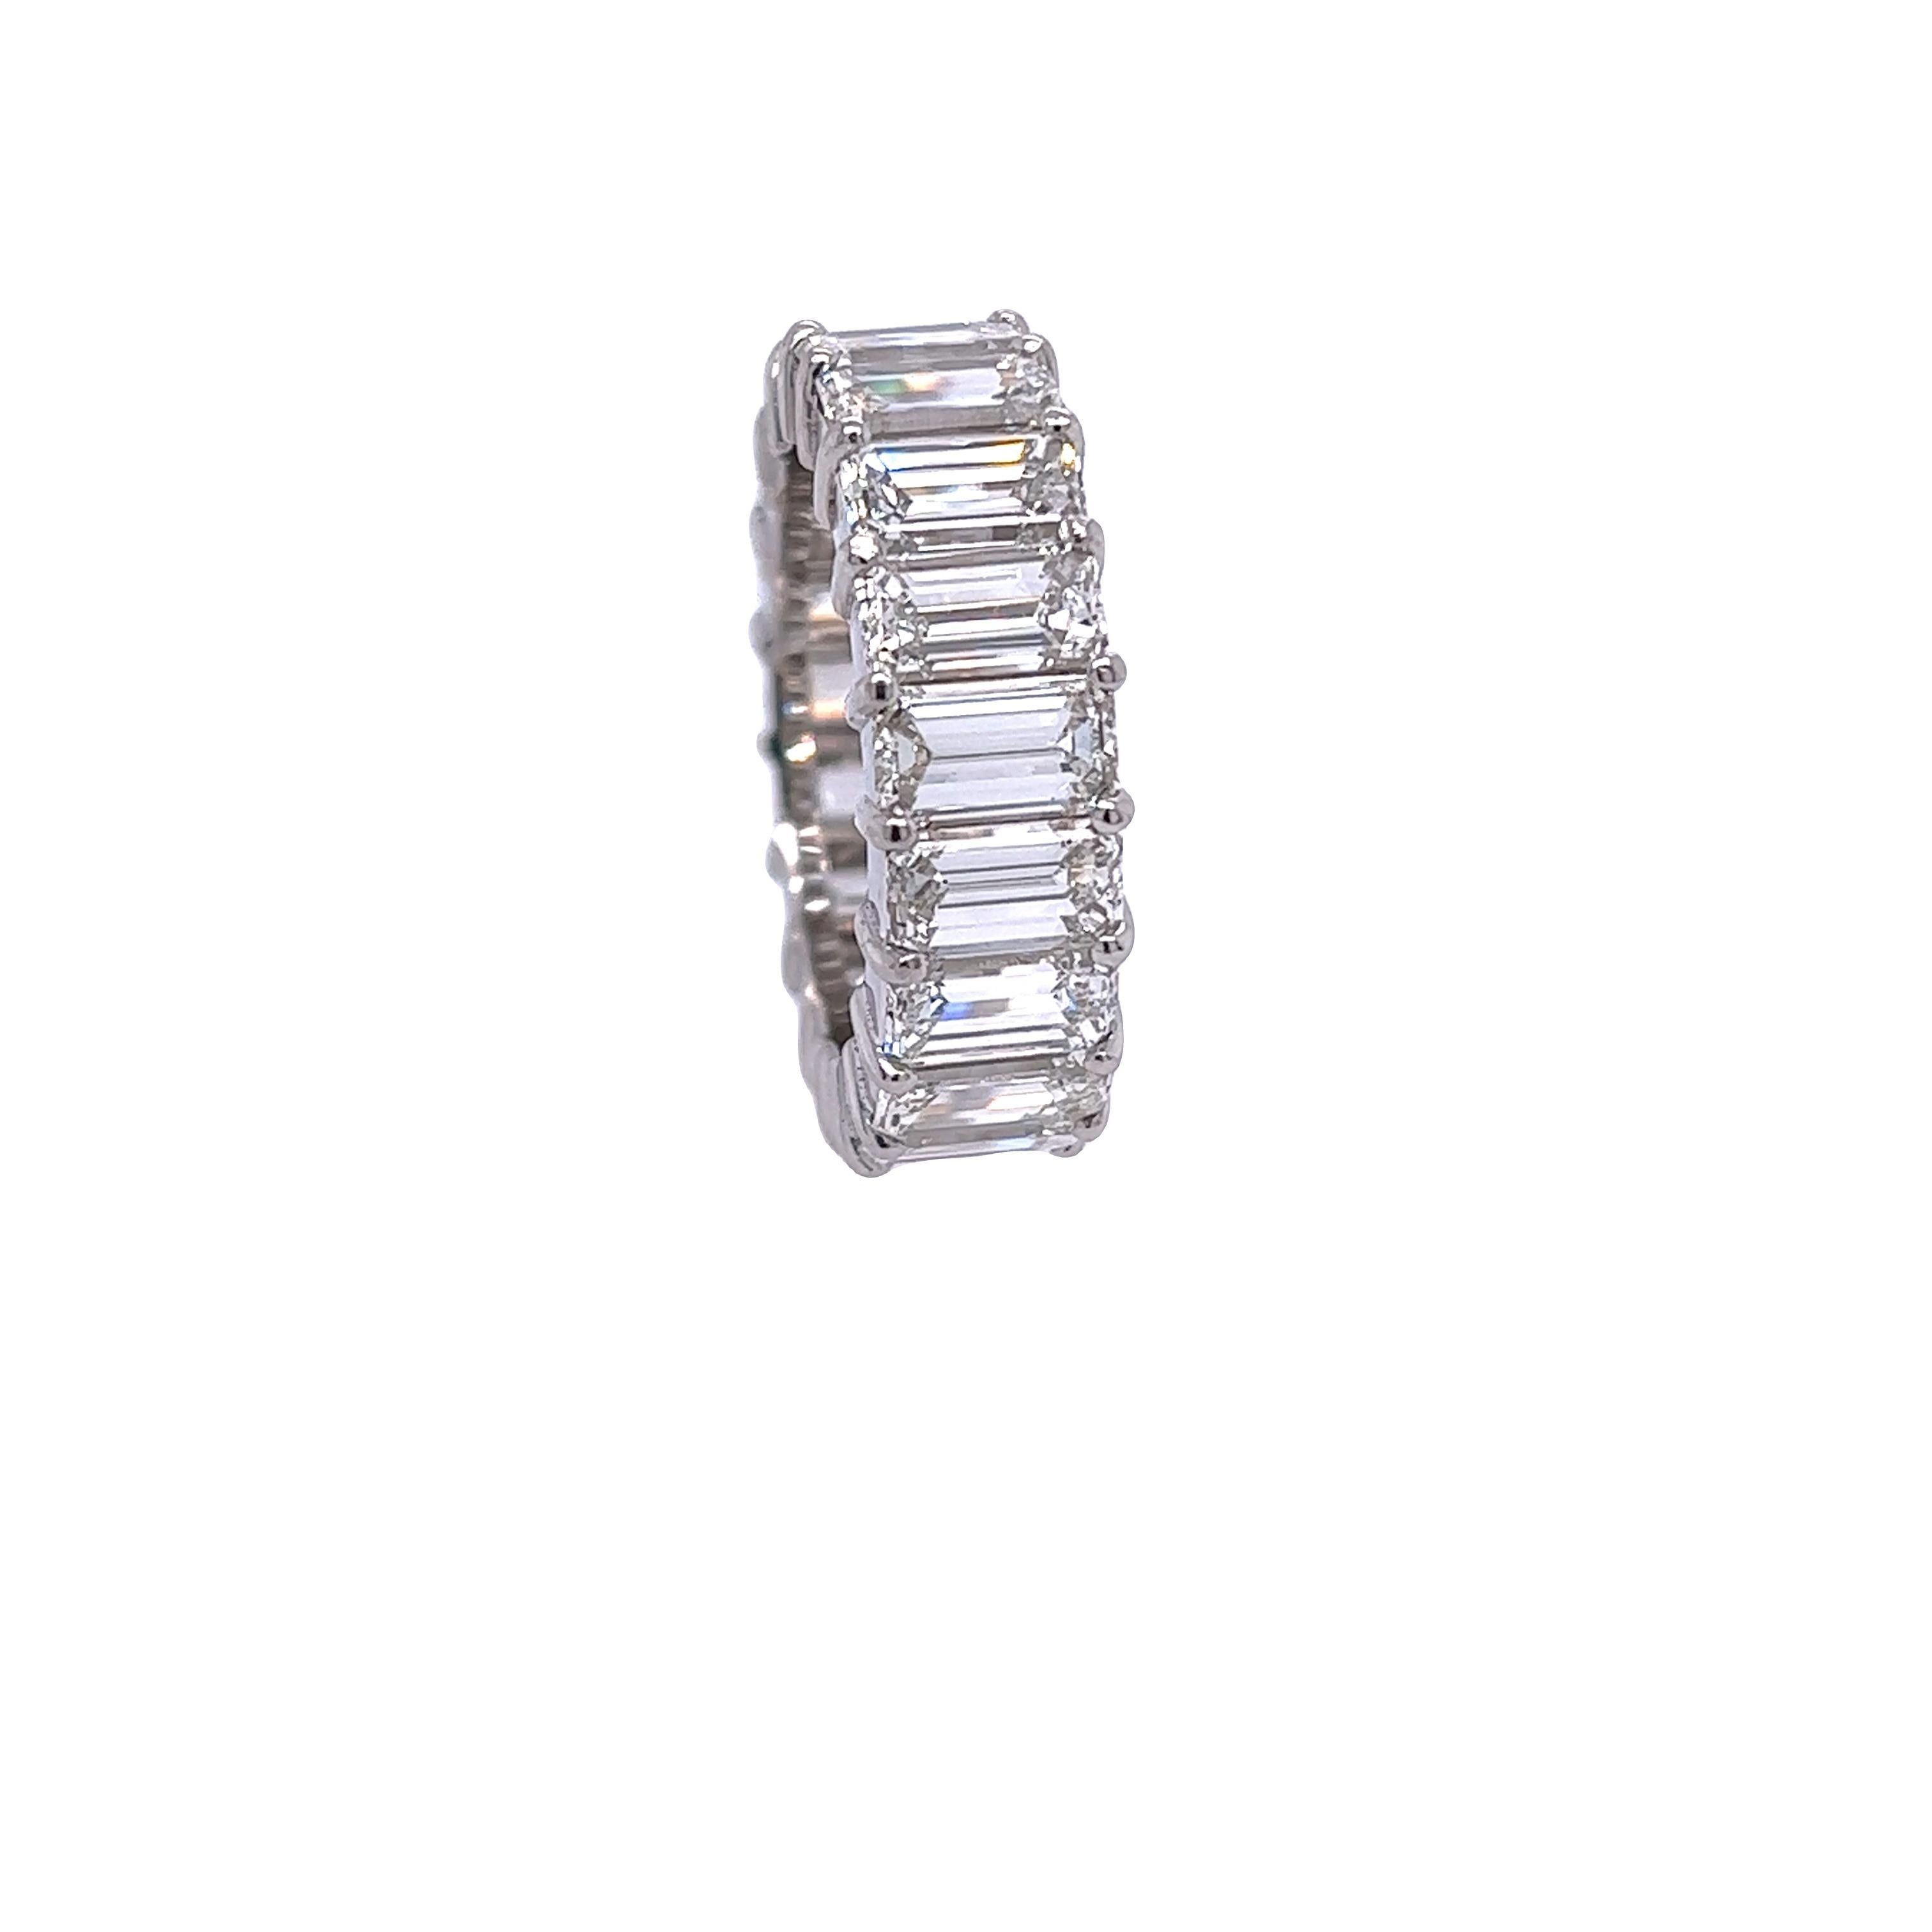 Rosenberg Diamonds & Co. 10.45 total carat weight Emerald cut diamond eternity band. This beautiful platinum eternity band has nineteen emerald shape diamonds ranging from G-H in color VS2 - VVS in clarity with a half a carat each stone designed by